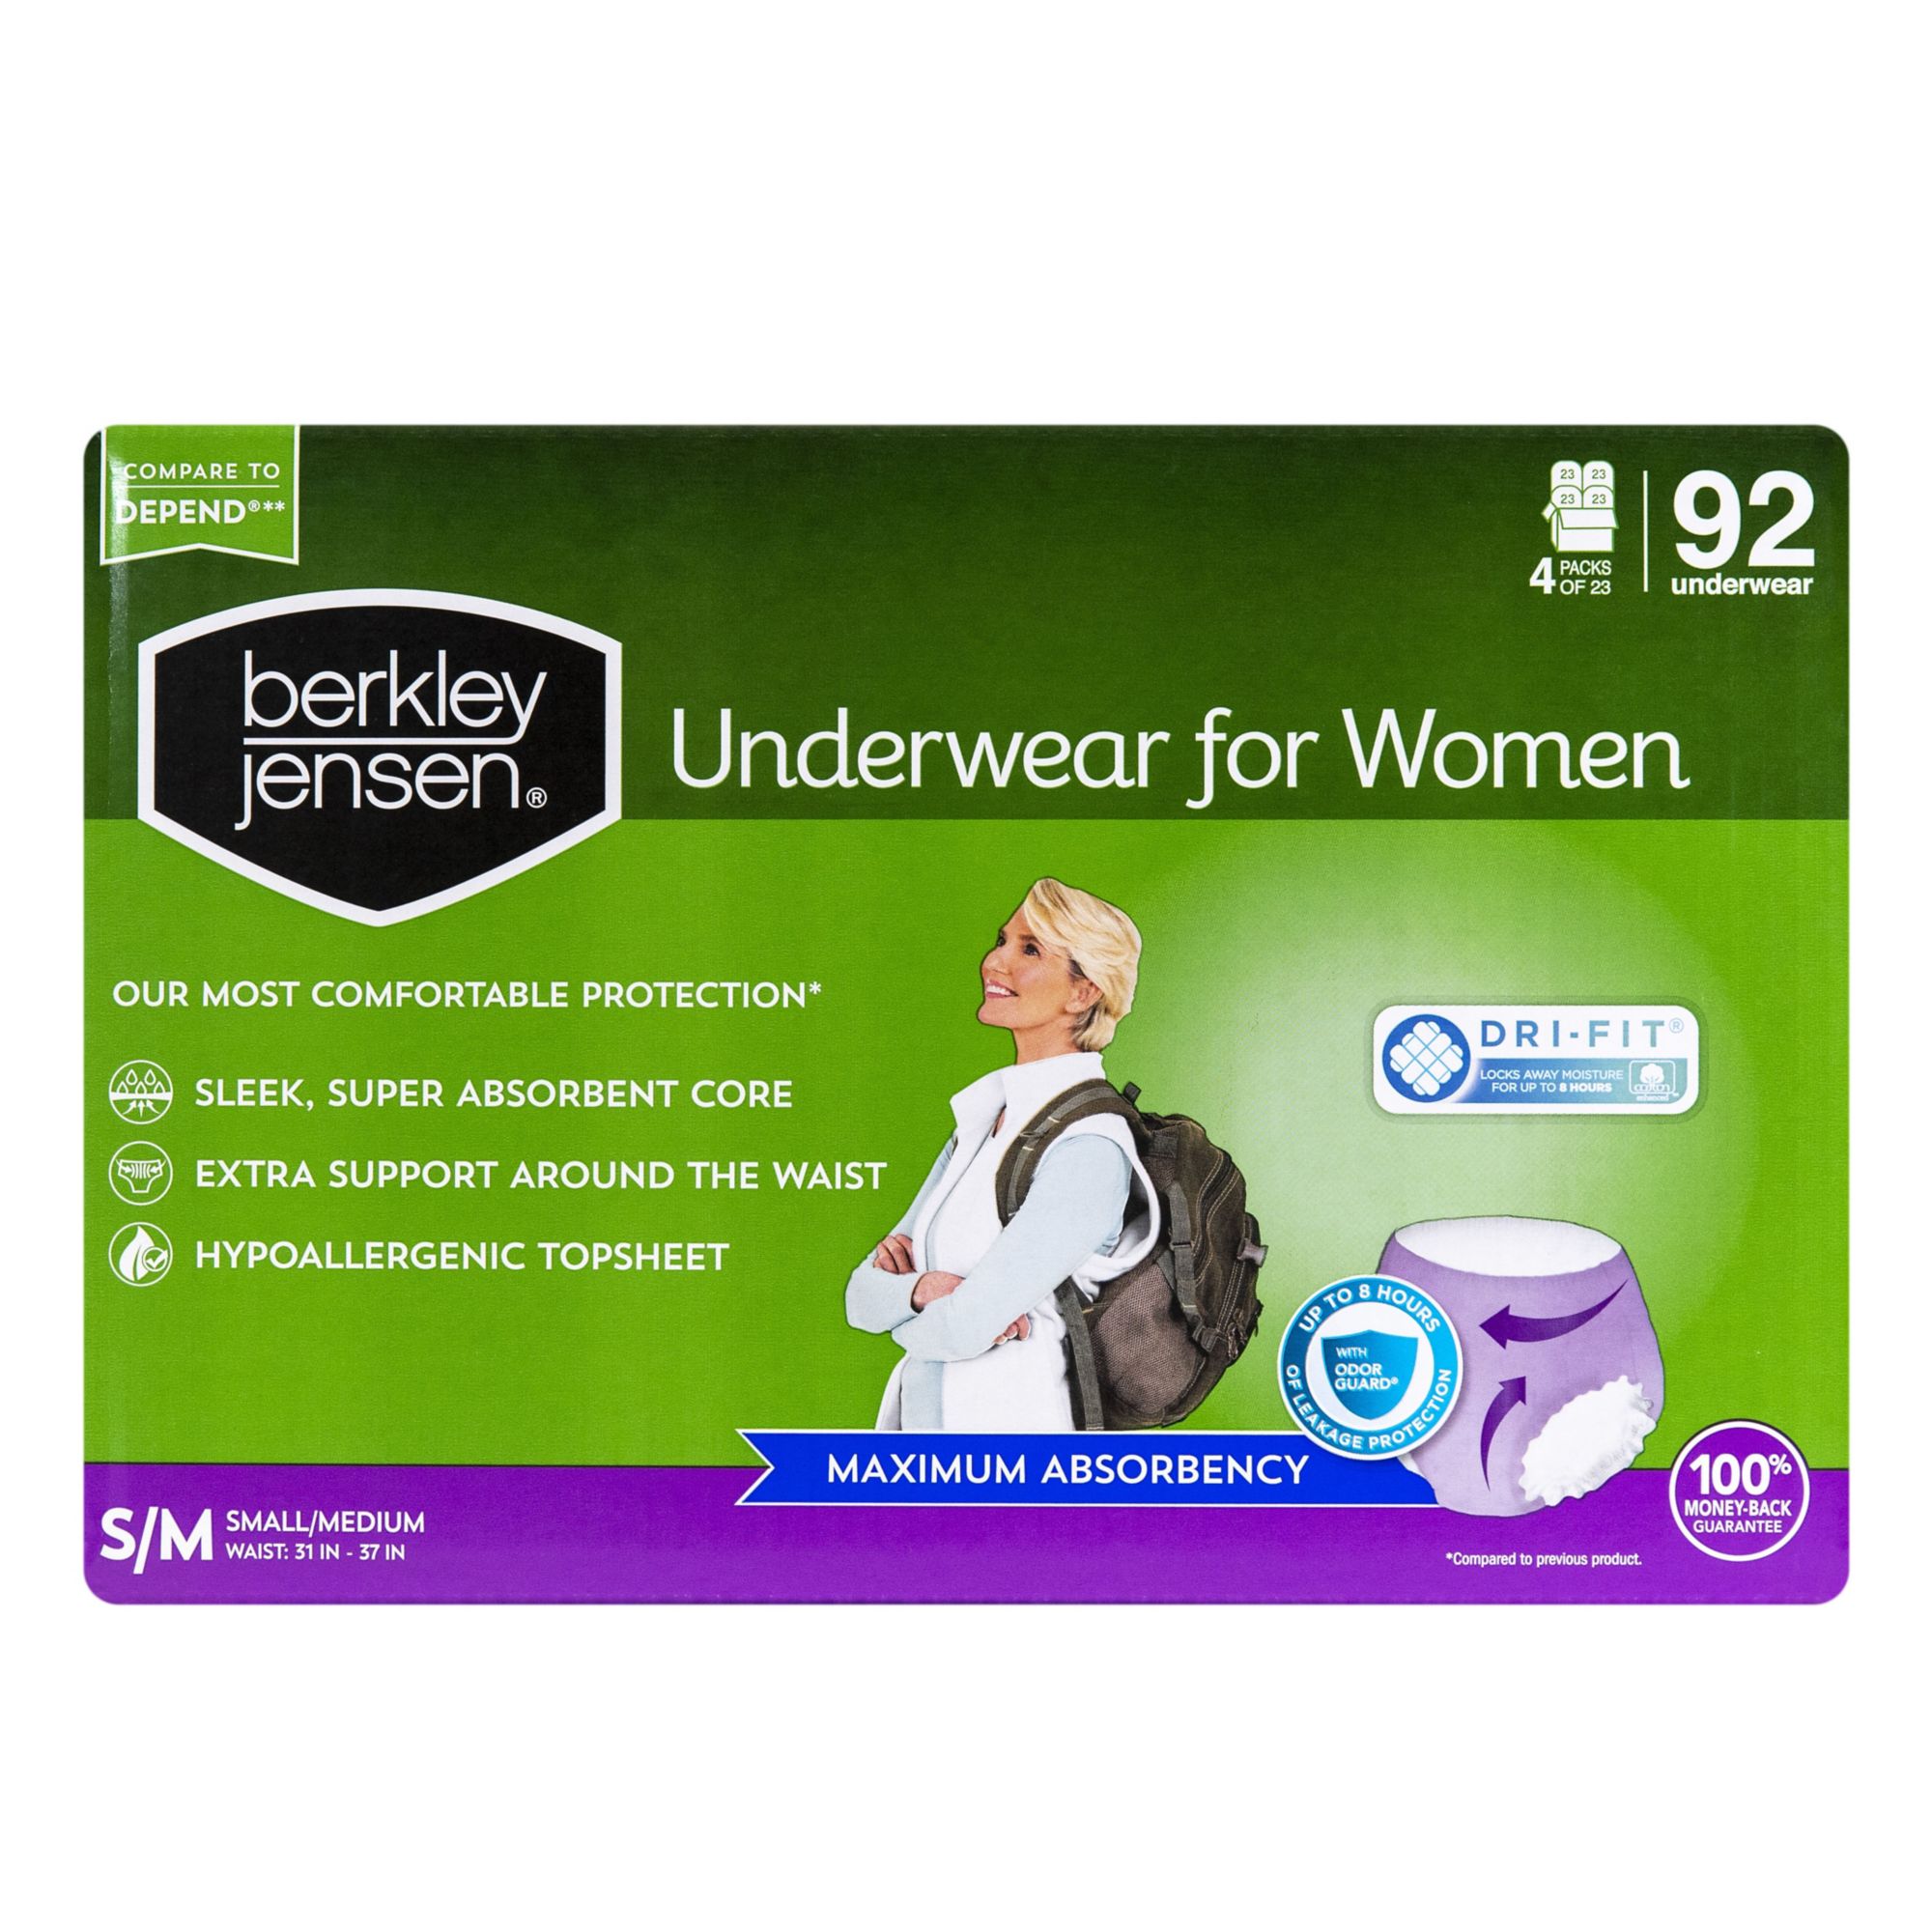 Depend Fit Flex Incontinence Underwear For Women(Small) in Ipaja